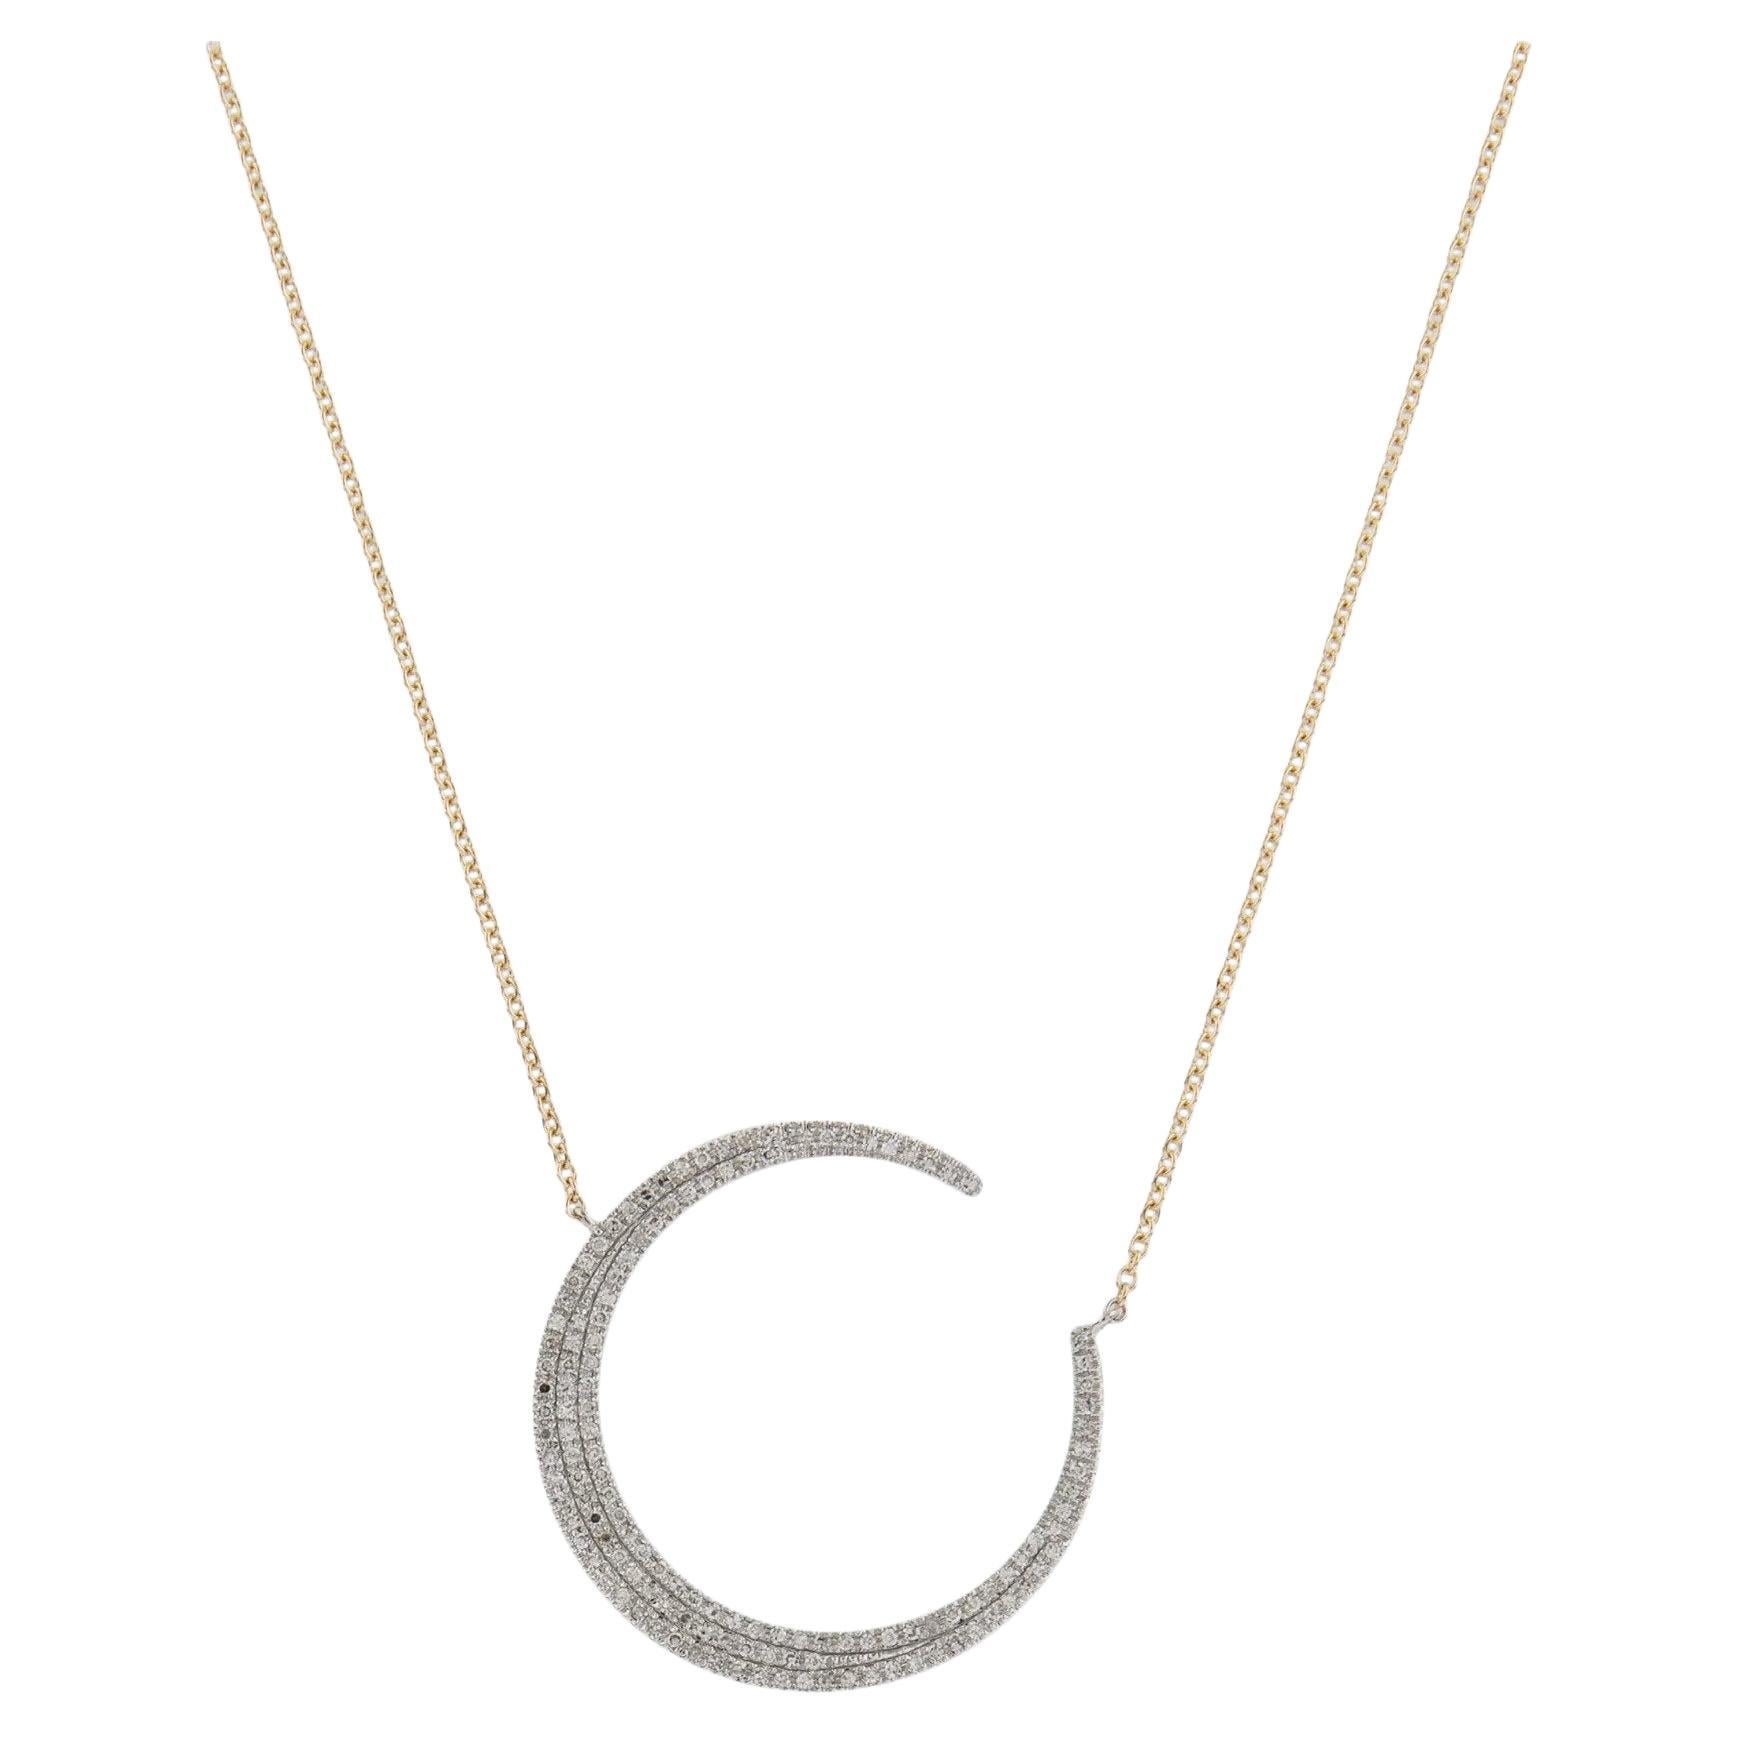 0.37 Carat Diamond Crescent Moon White & Yellow Gold Pendant Necklace For Sale